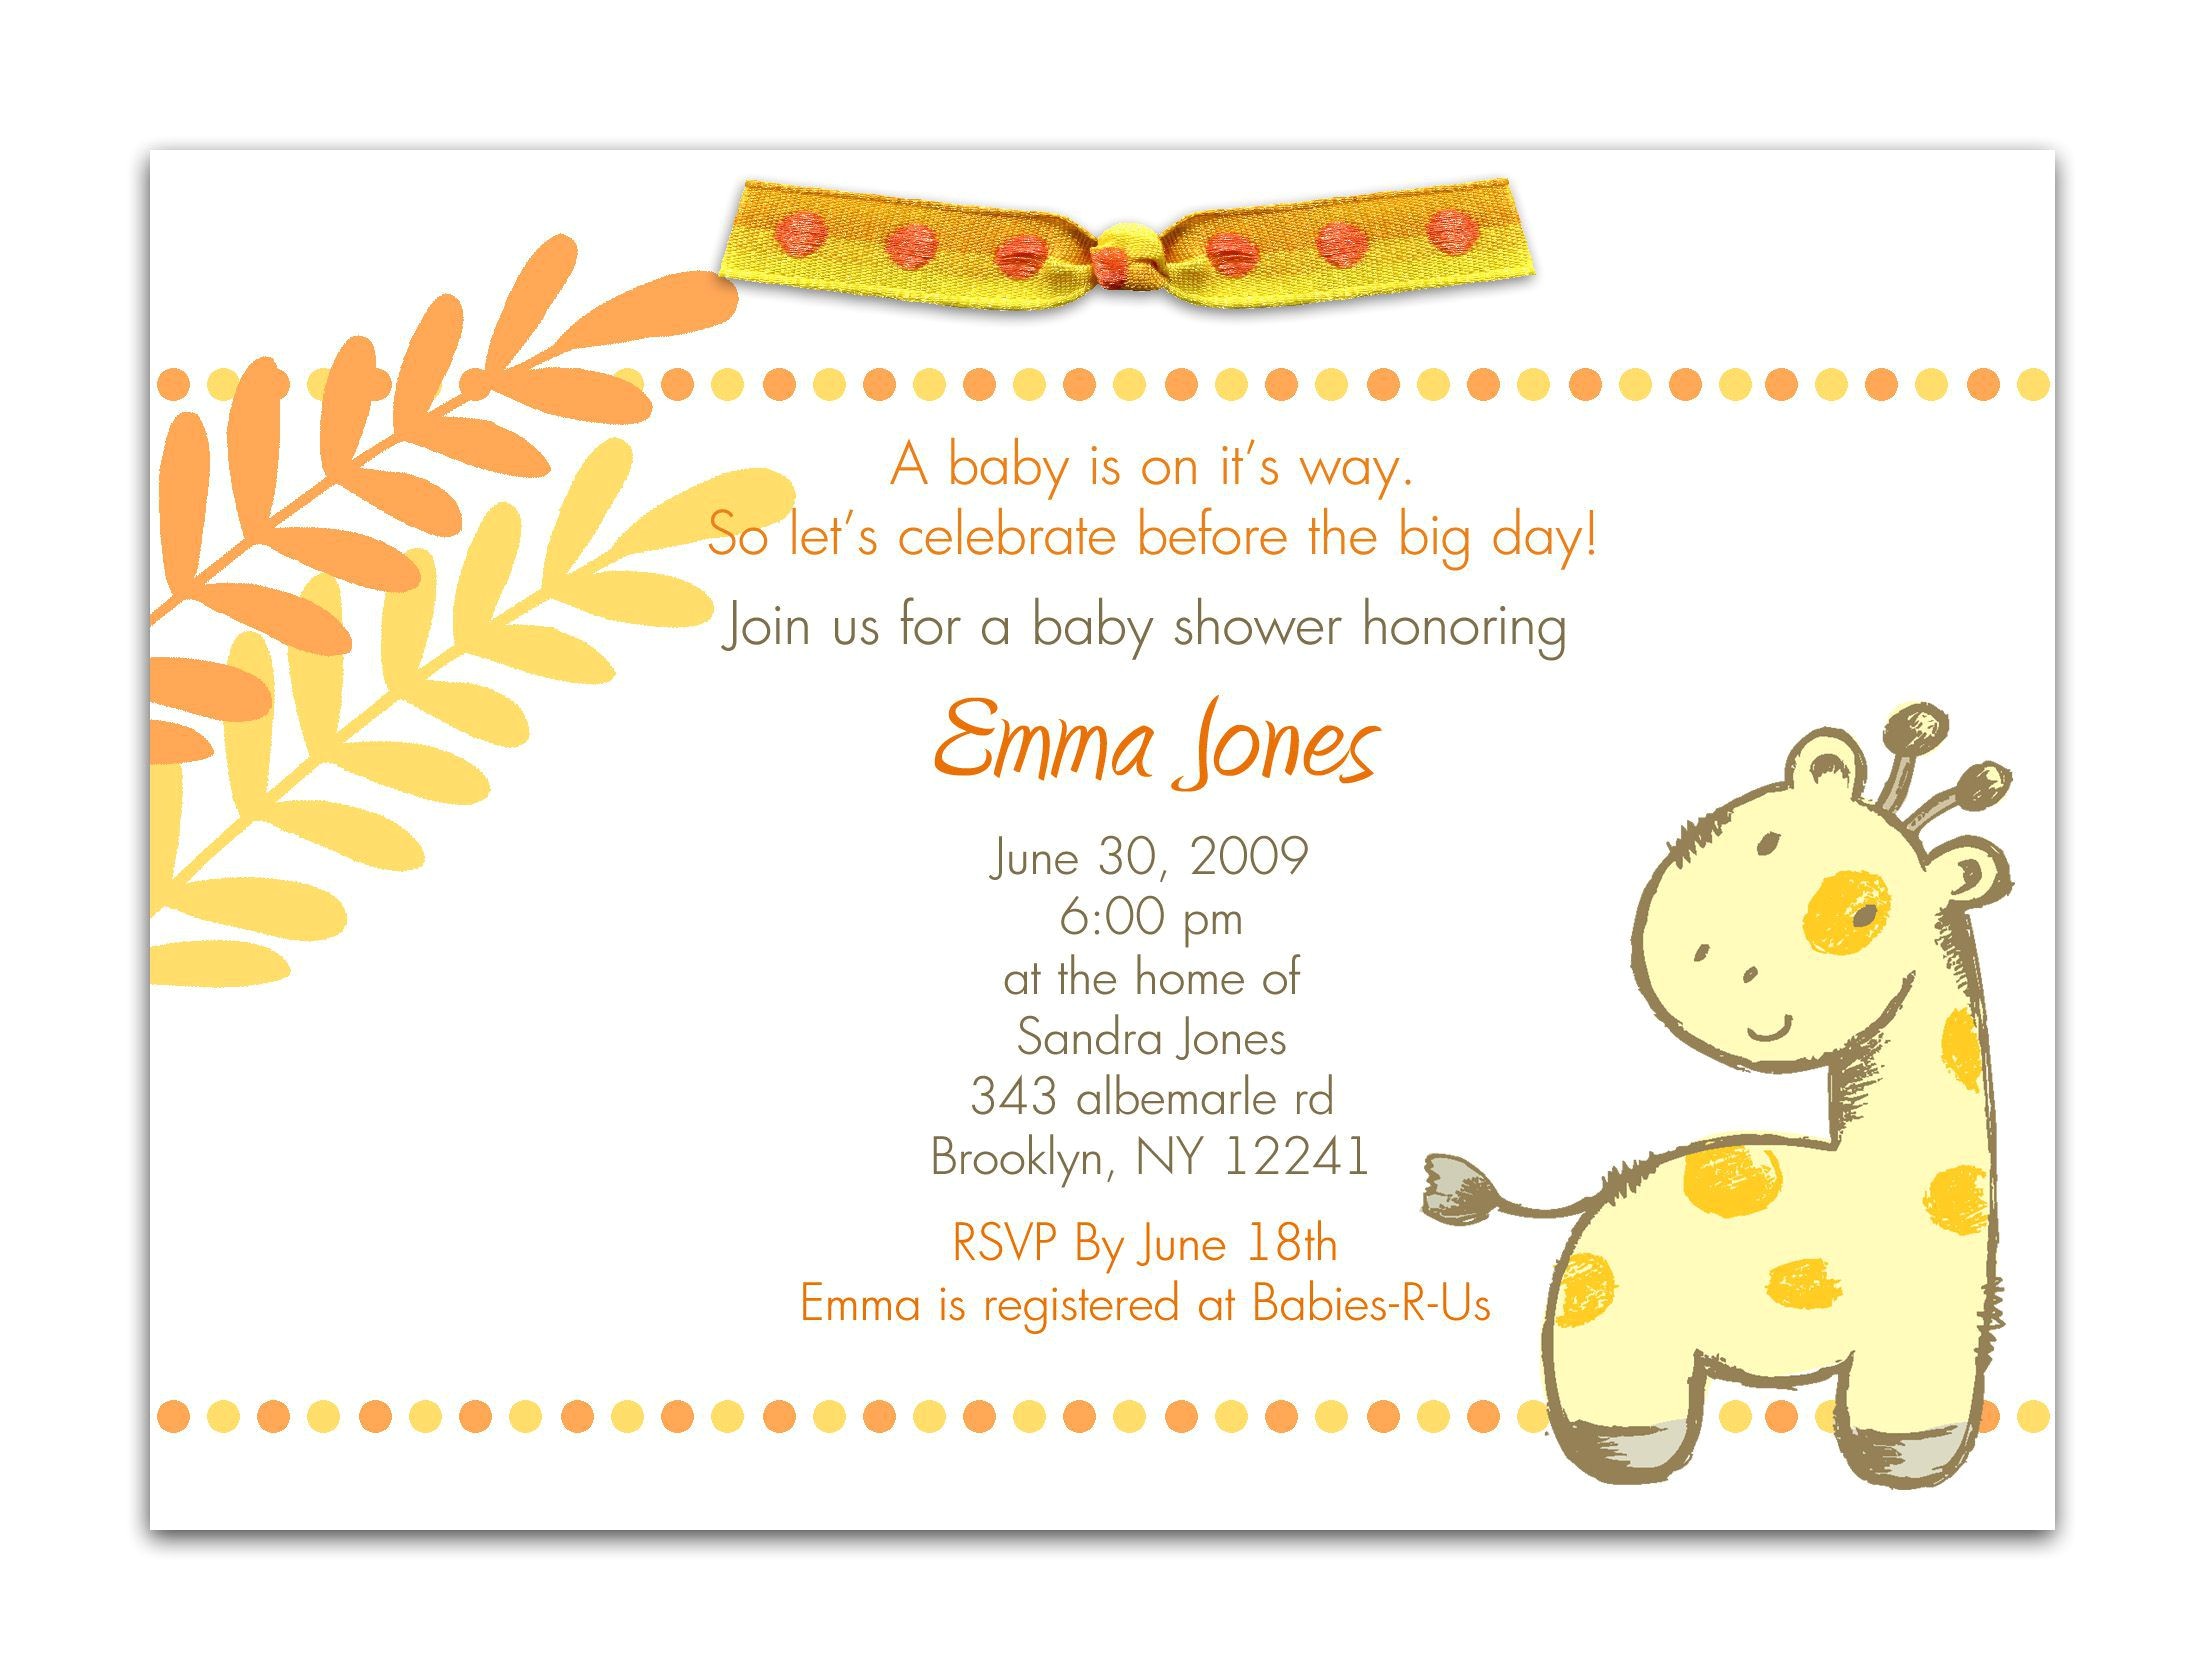 Baby Shower Invitations Layouts Baby Shower Invitation Baby Shower Invitations Templates